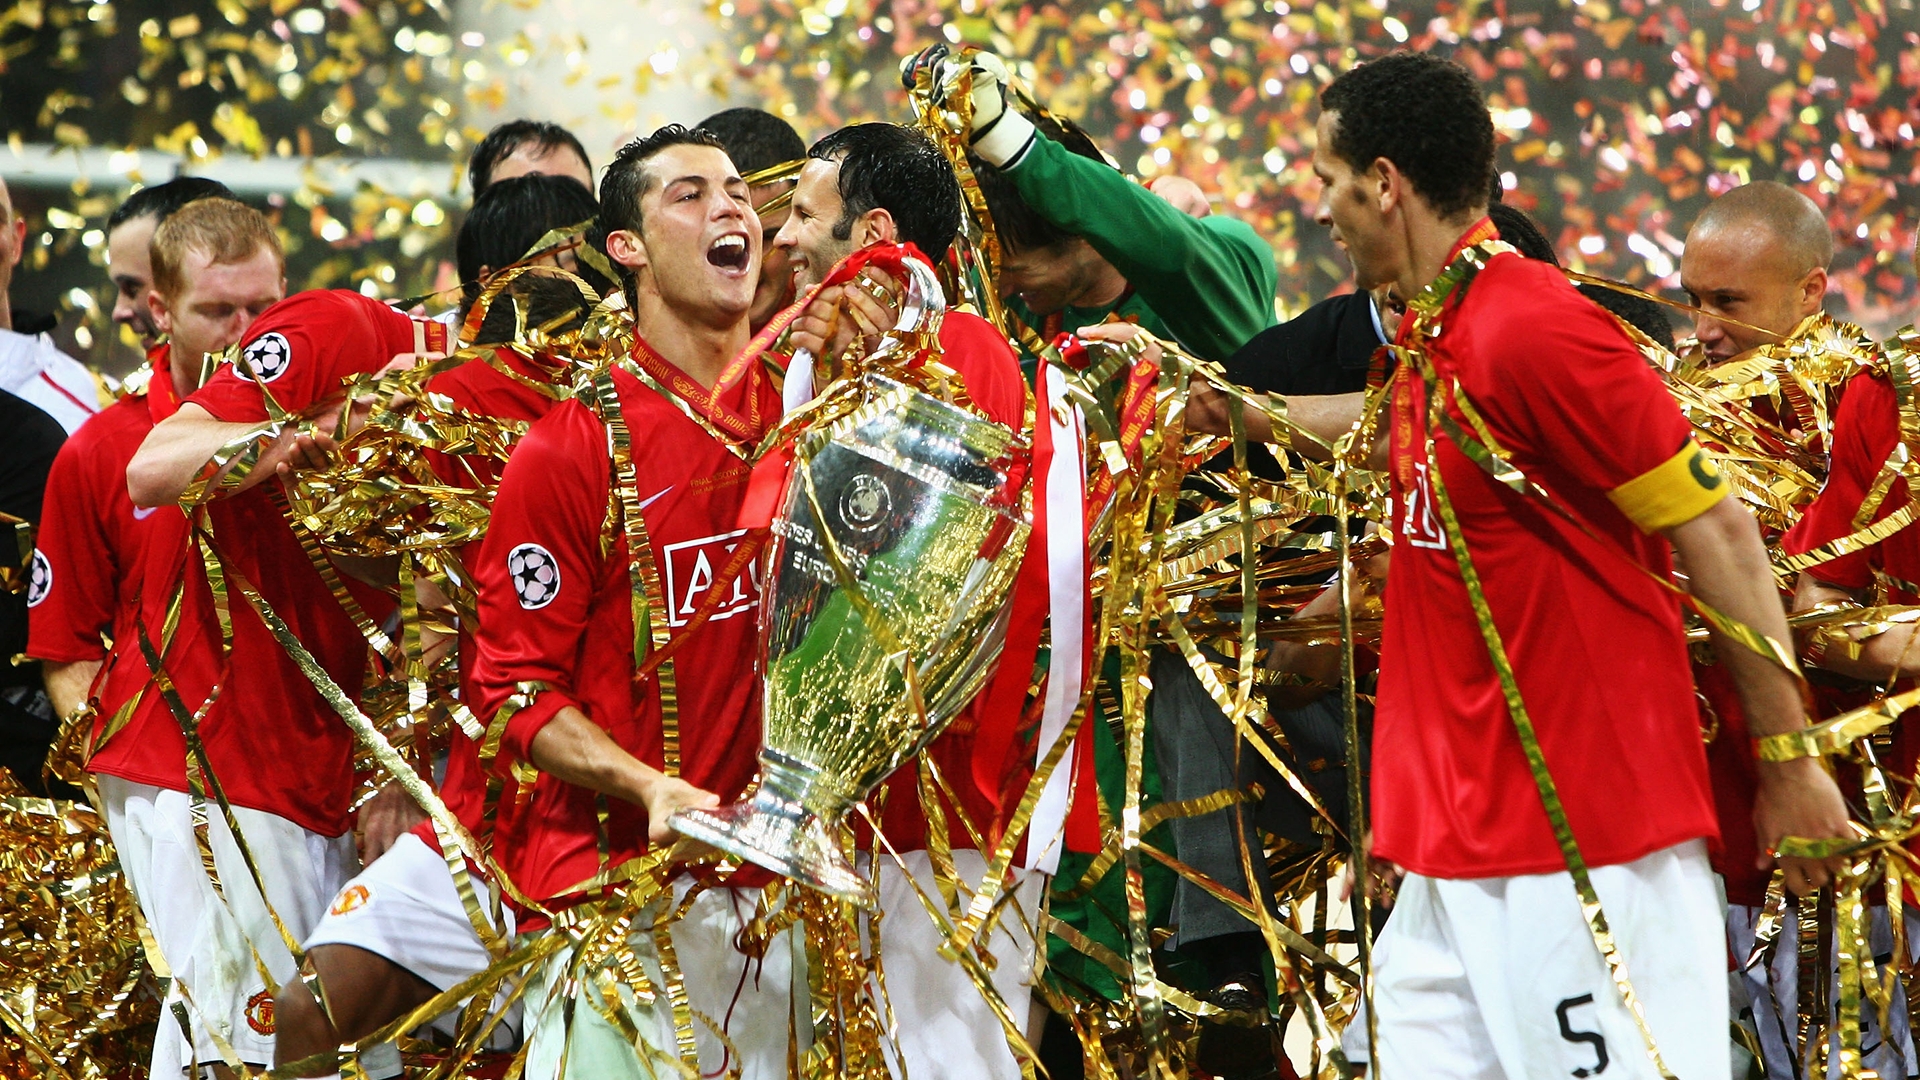 Manchester United's history in the Champions League: Titles, finals in Europe |